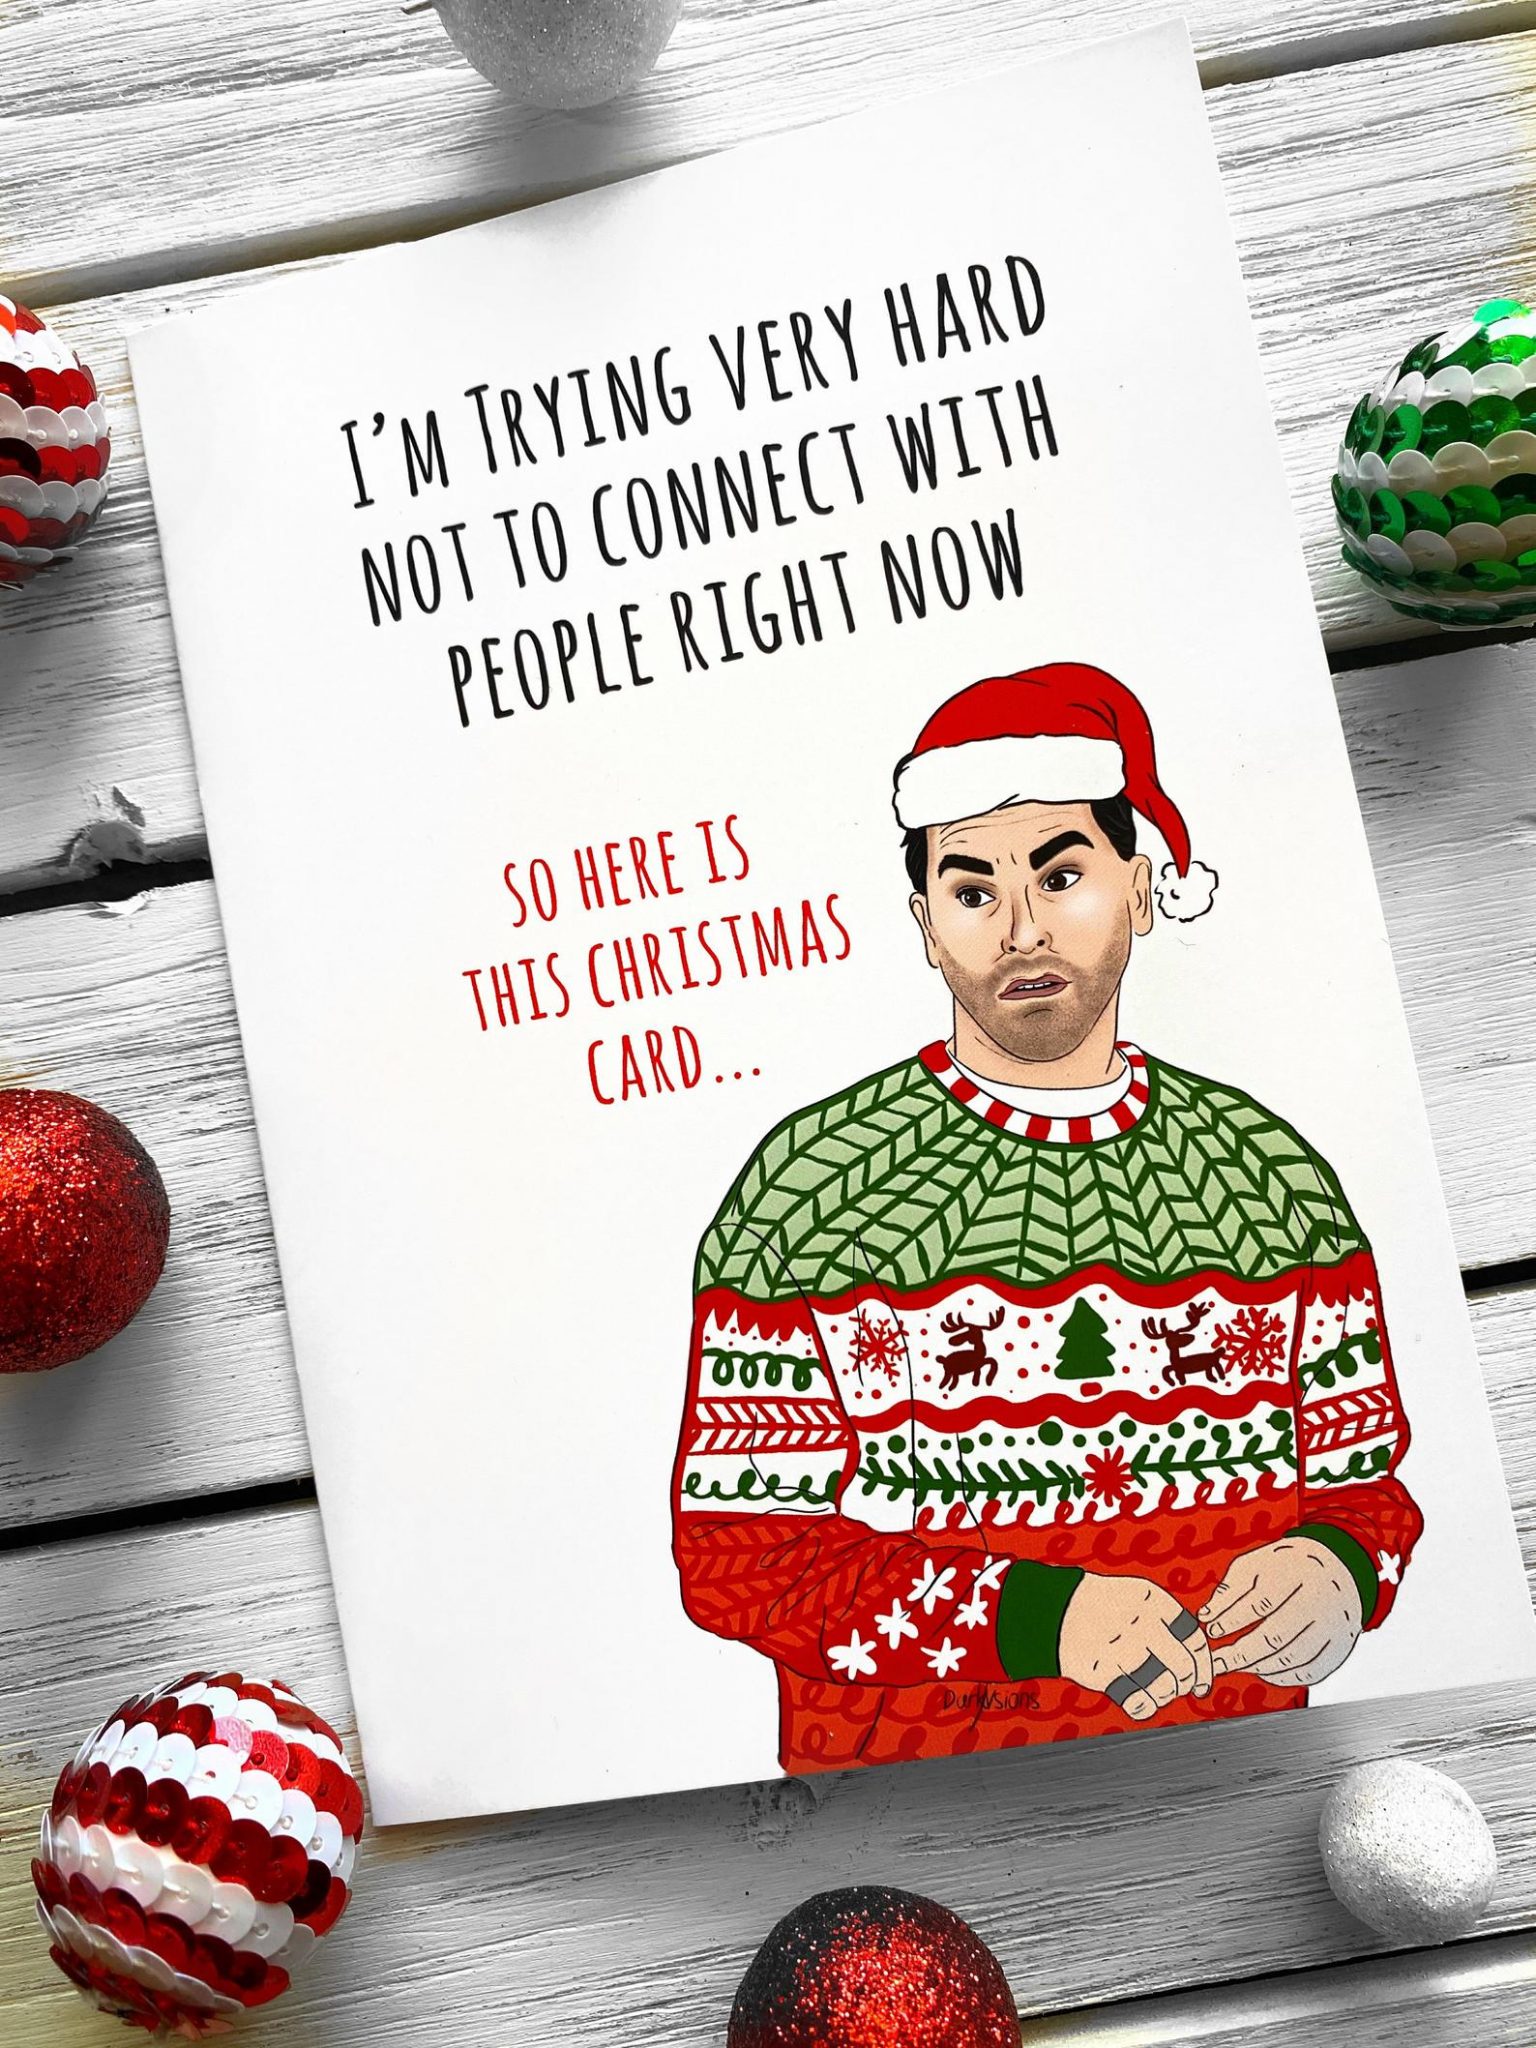 10-funny-christmas-cards-for-2020-because-we-all-need-a-laugh-right-now